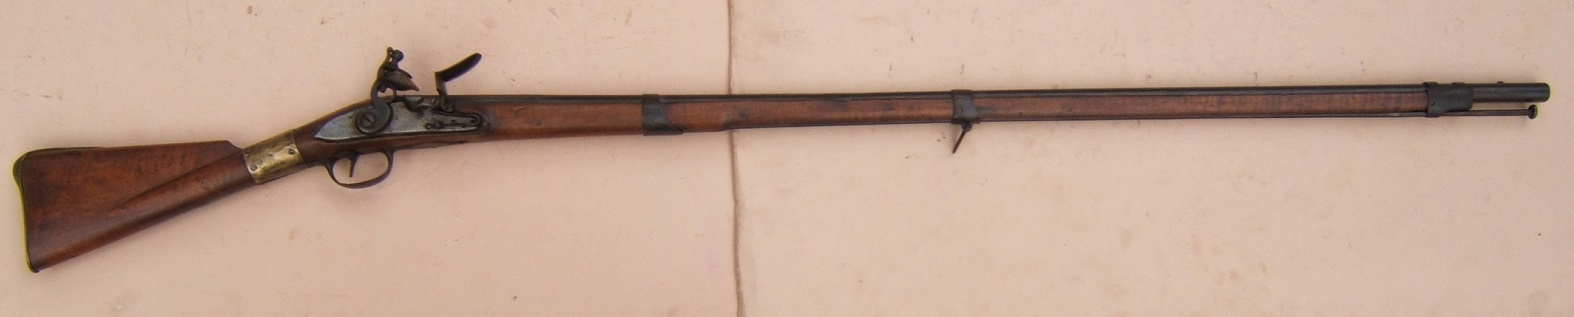   A RARE COLONIAL/AMERICAN REVOLUTIONARY WAR PERIOD AMERICAN-ASSEMBLED TIGER MAPLE STOCK 